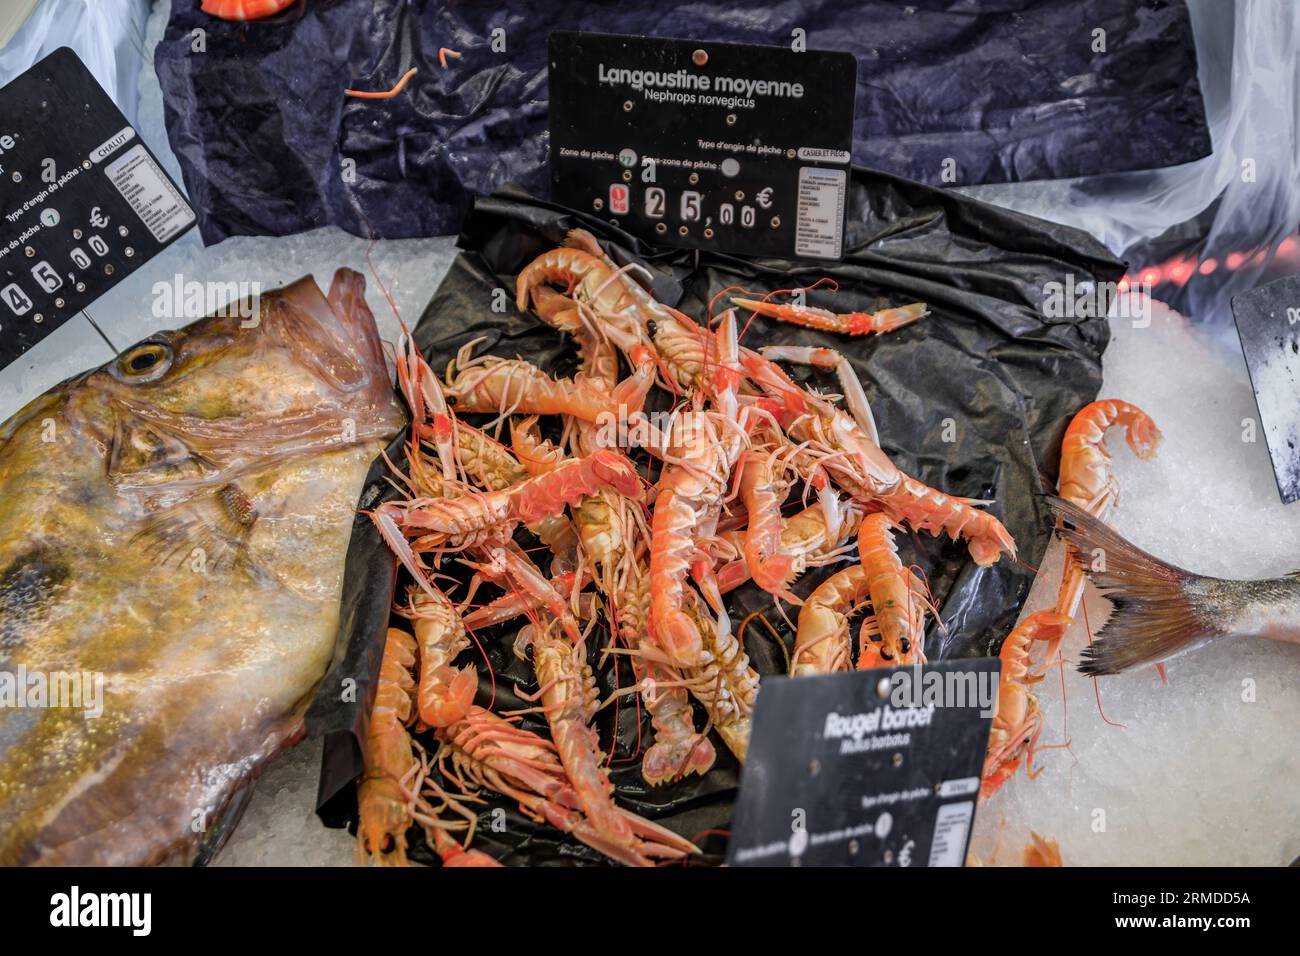 Fresh red langostino on display at the fish market in the Old Town, Vieille Ville in Menton, French Riviera, South of France Stock Photo